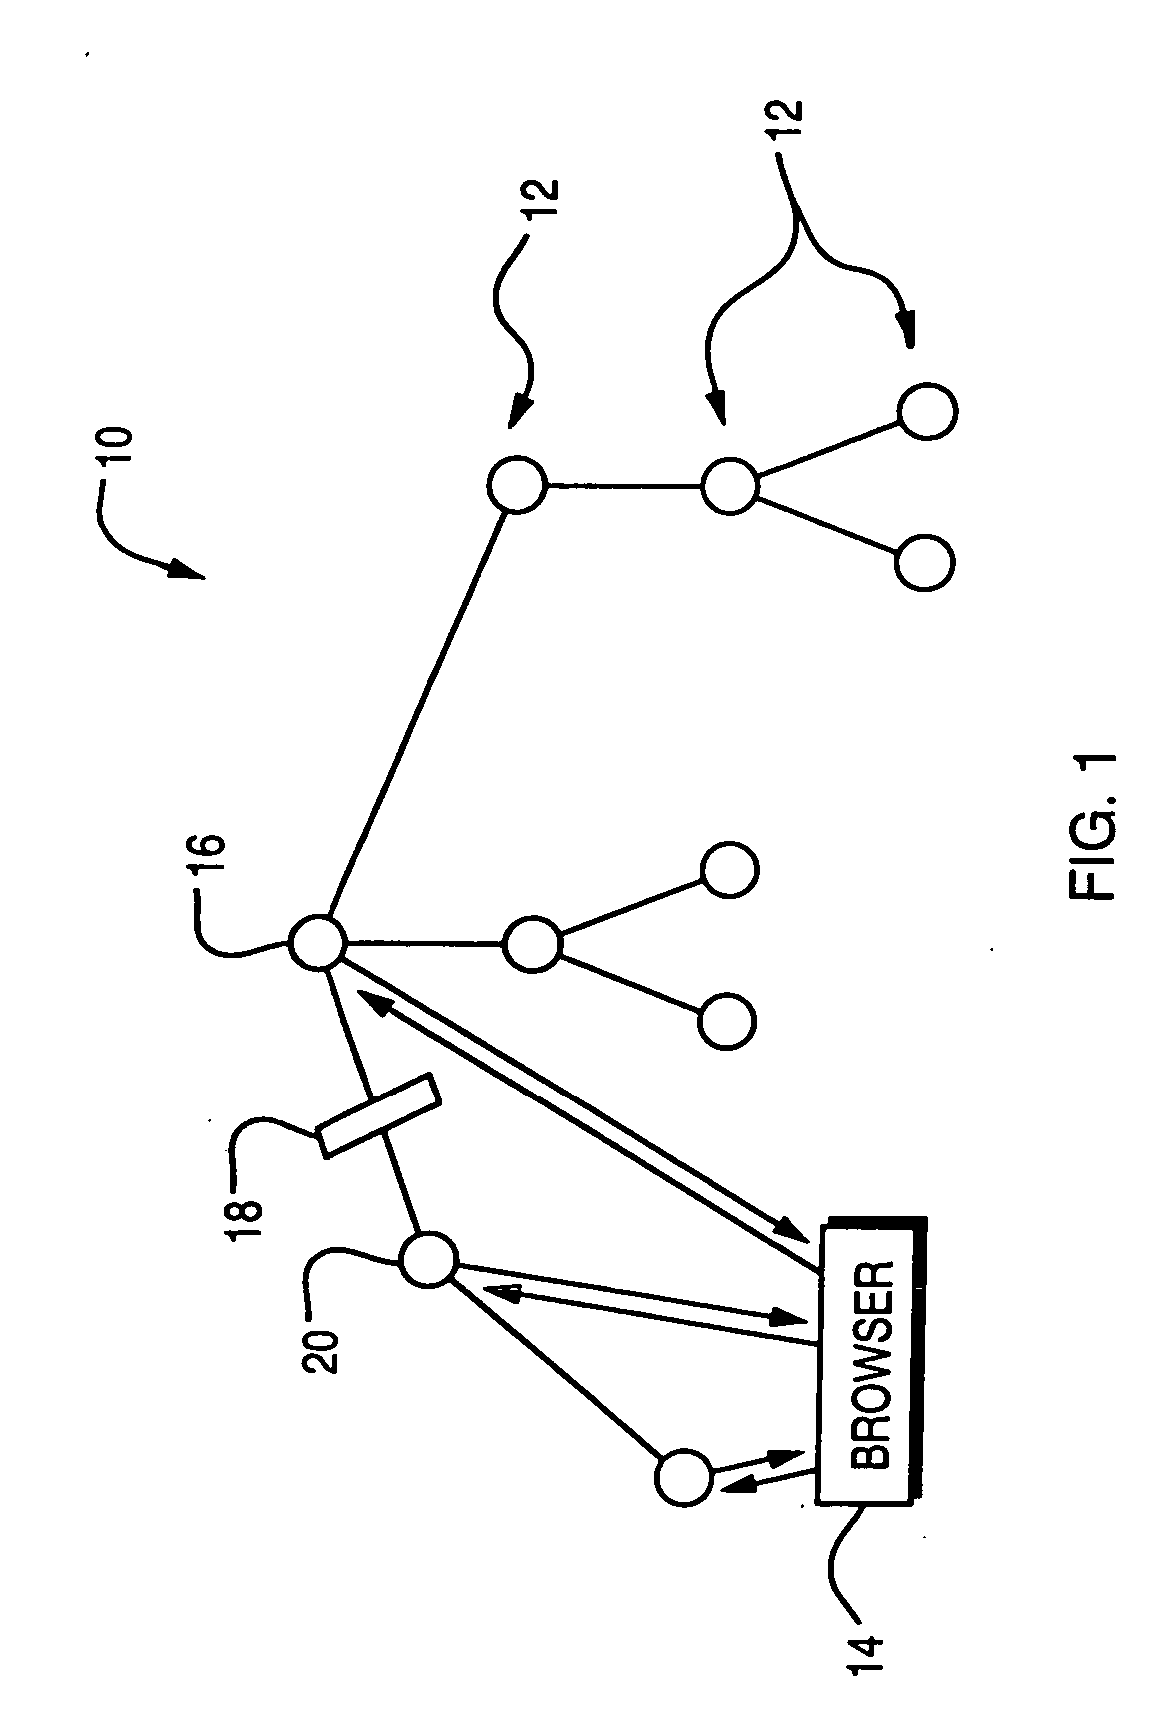 Methods and apparatus for routing requests in a network